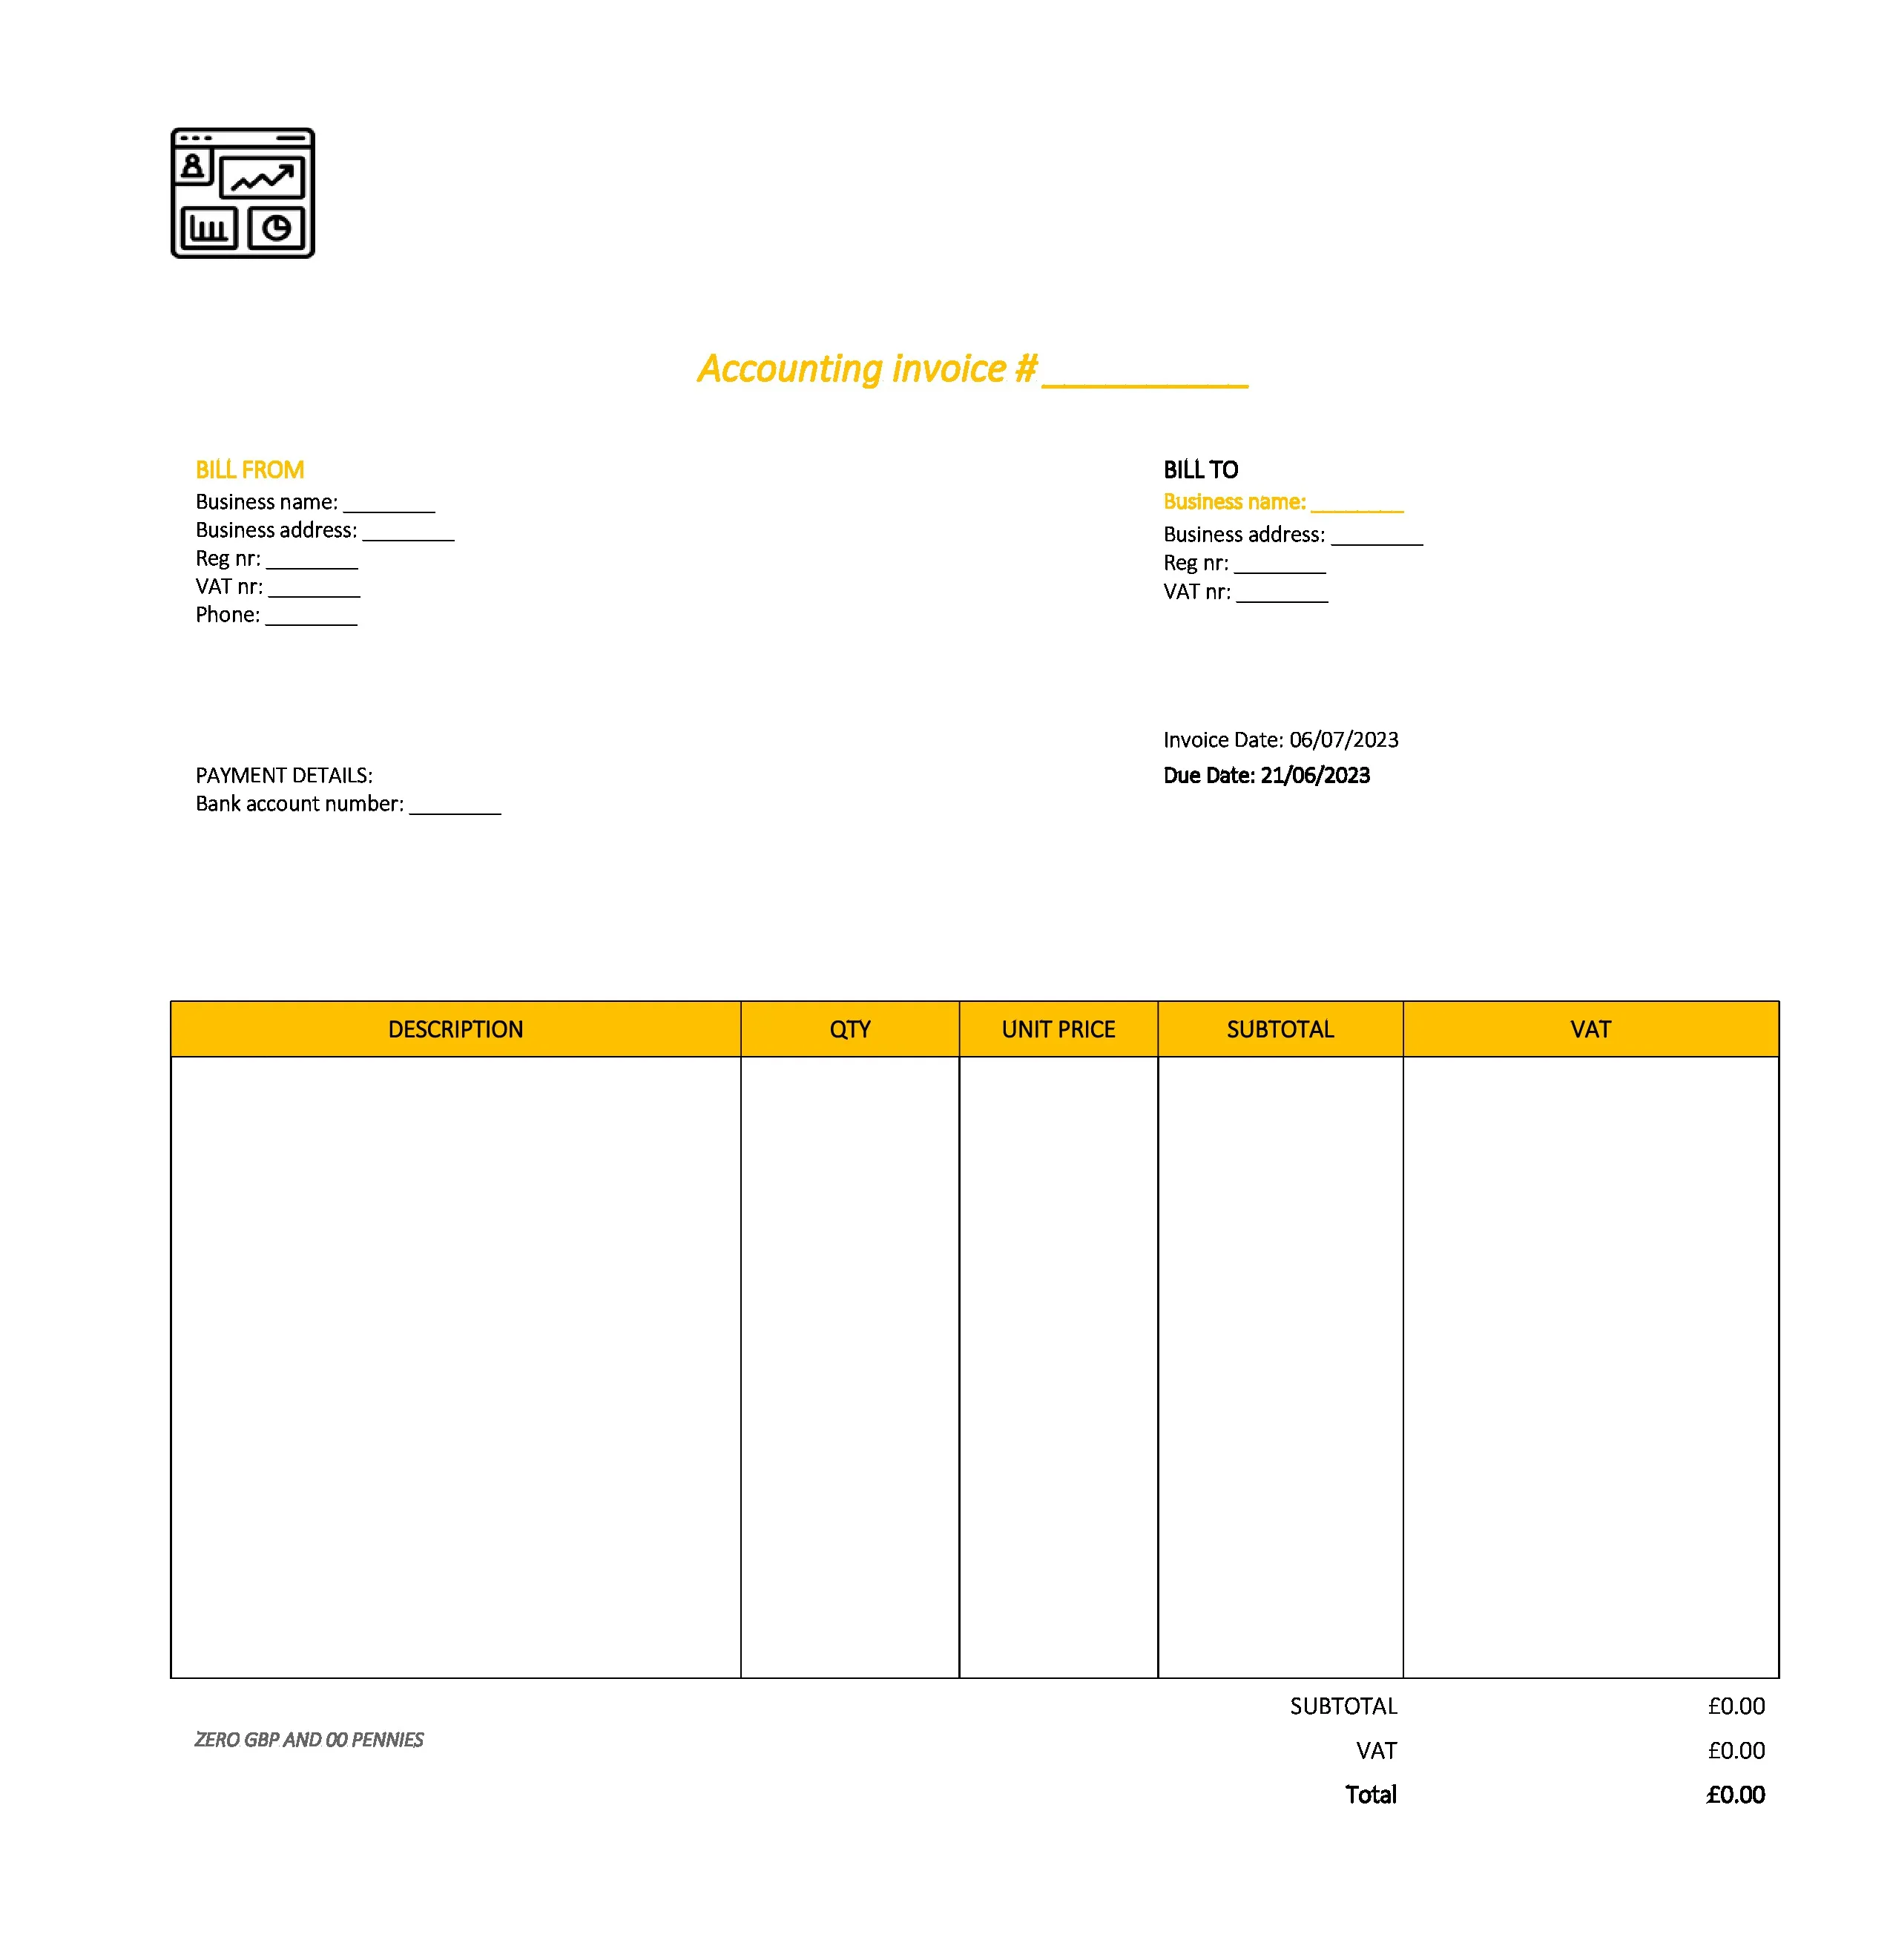 draft accounting invoice template UK Excel / Google sheets